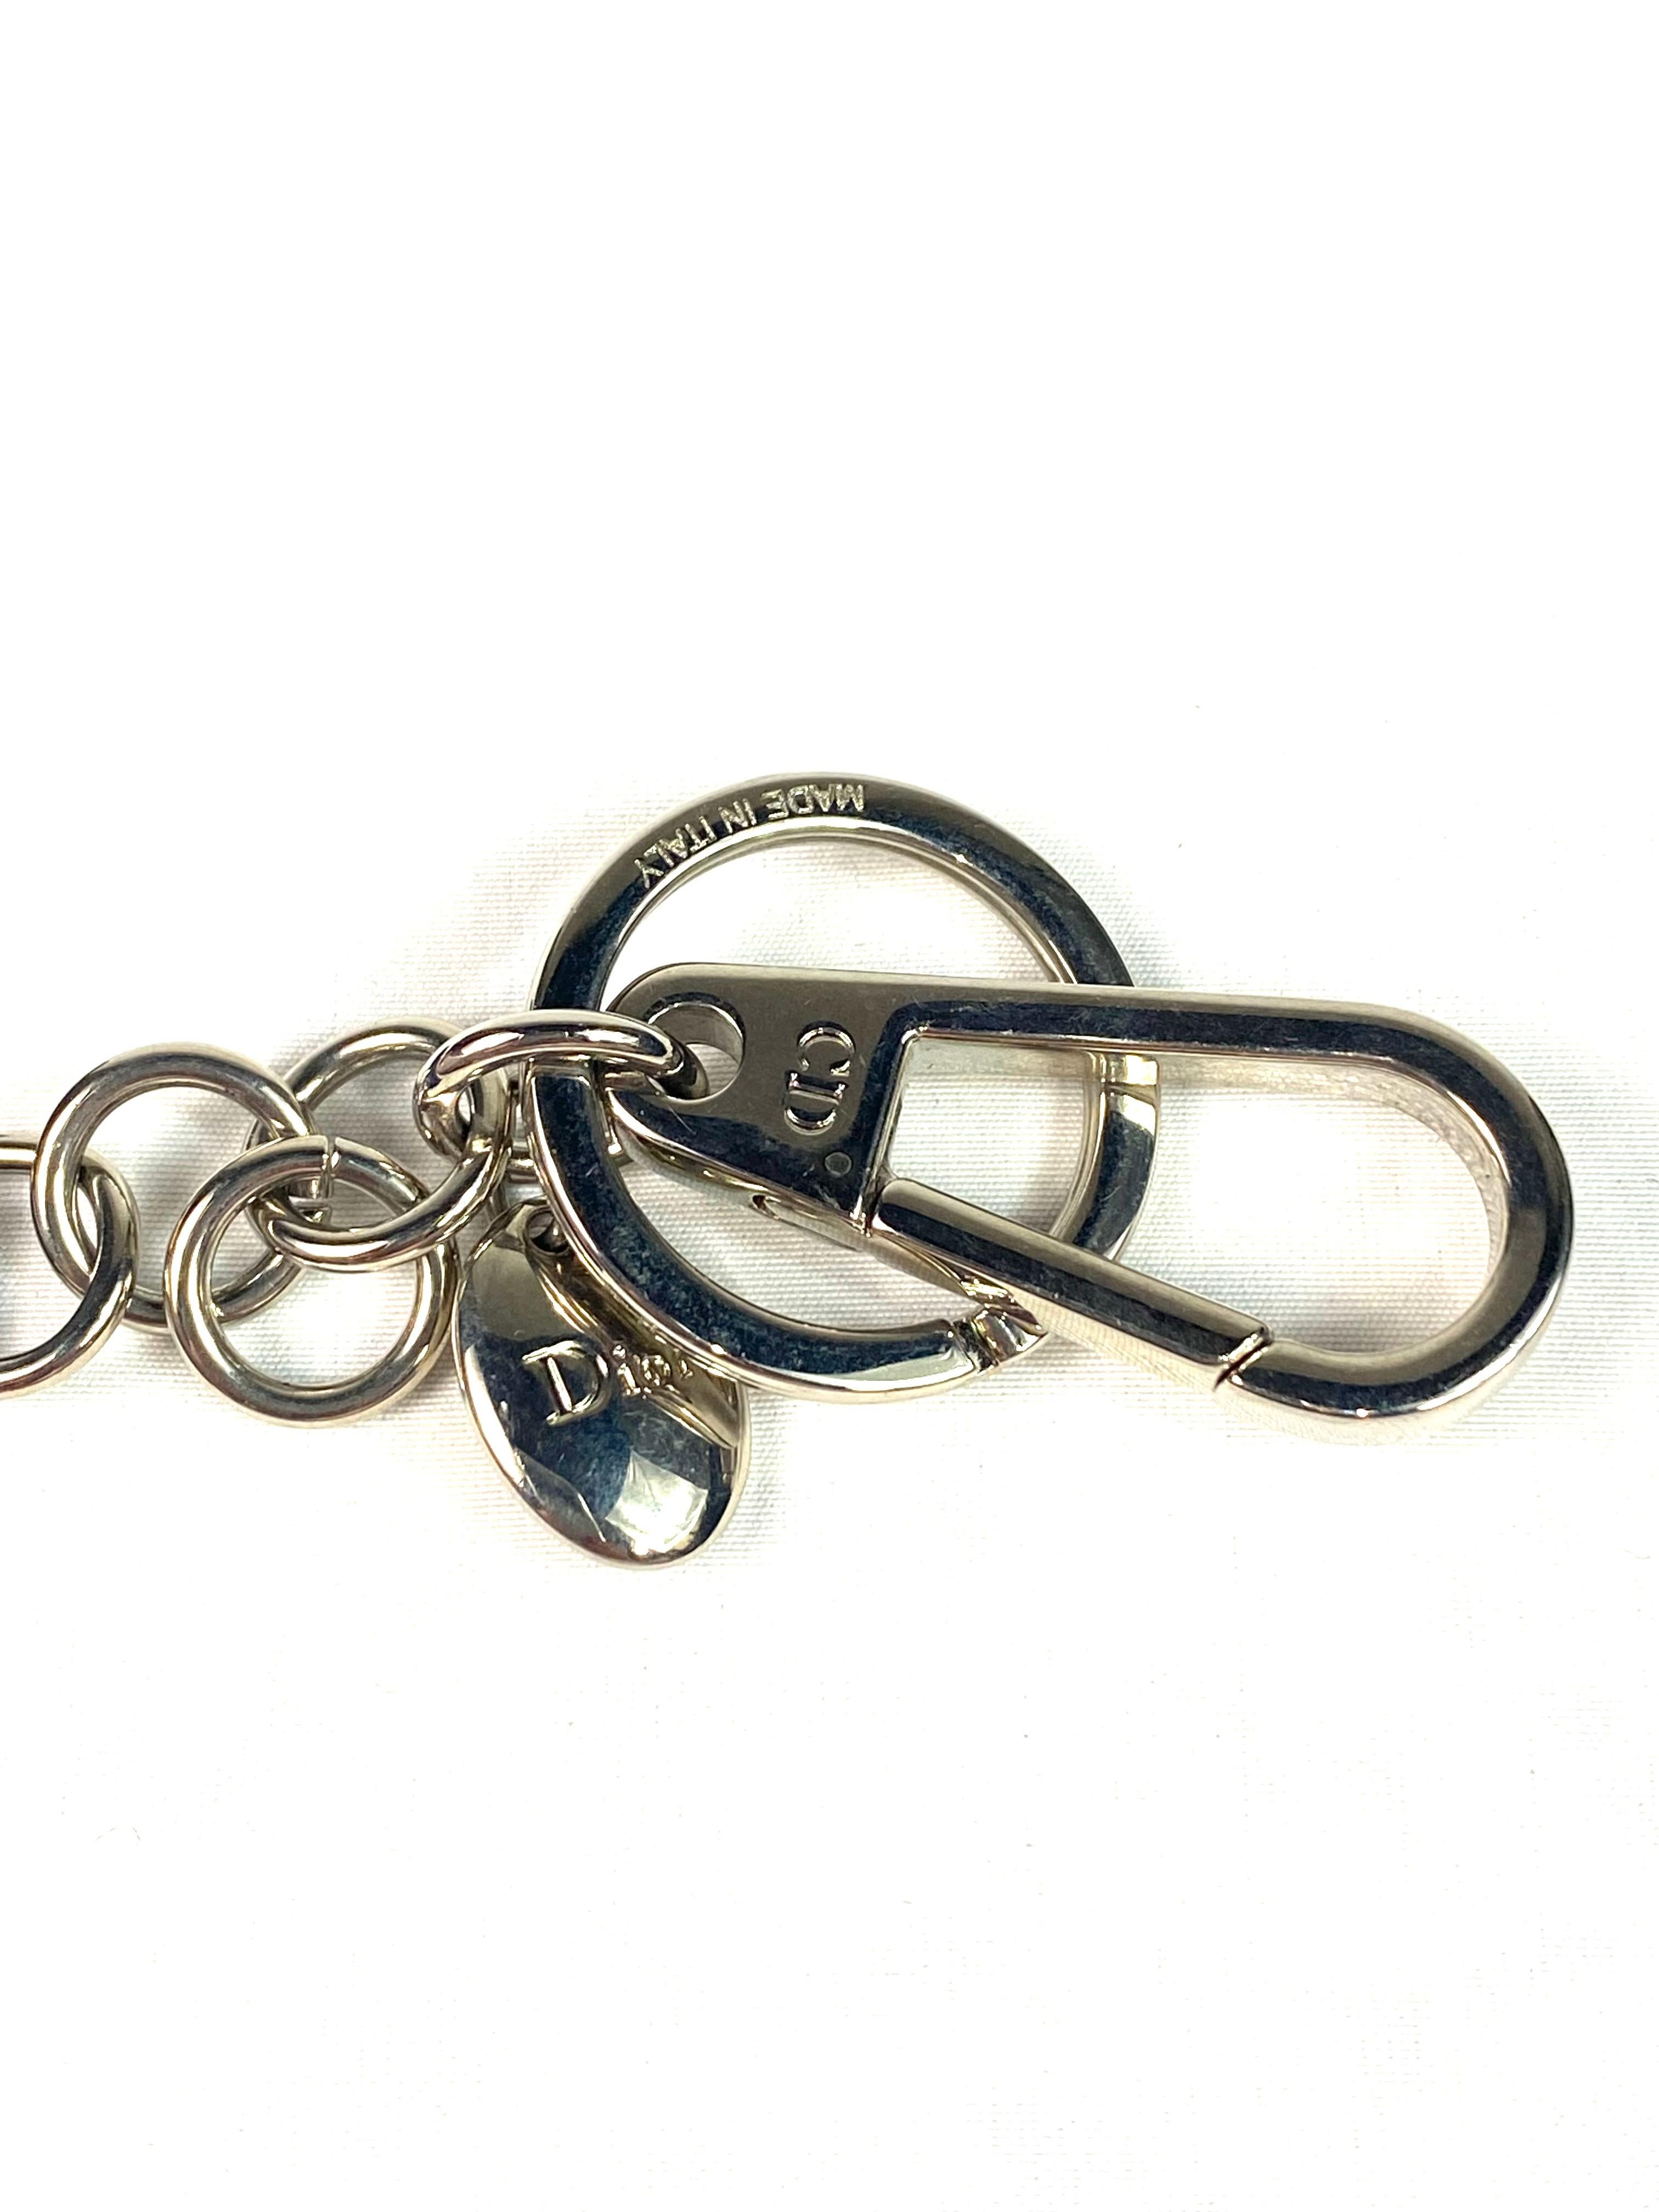 Product details:

The key chain features blue sequins and black embroidered writing on the top and black leather on the back with silver tone hardware.